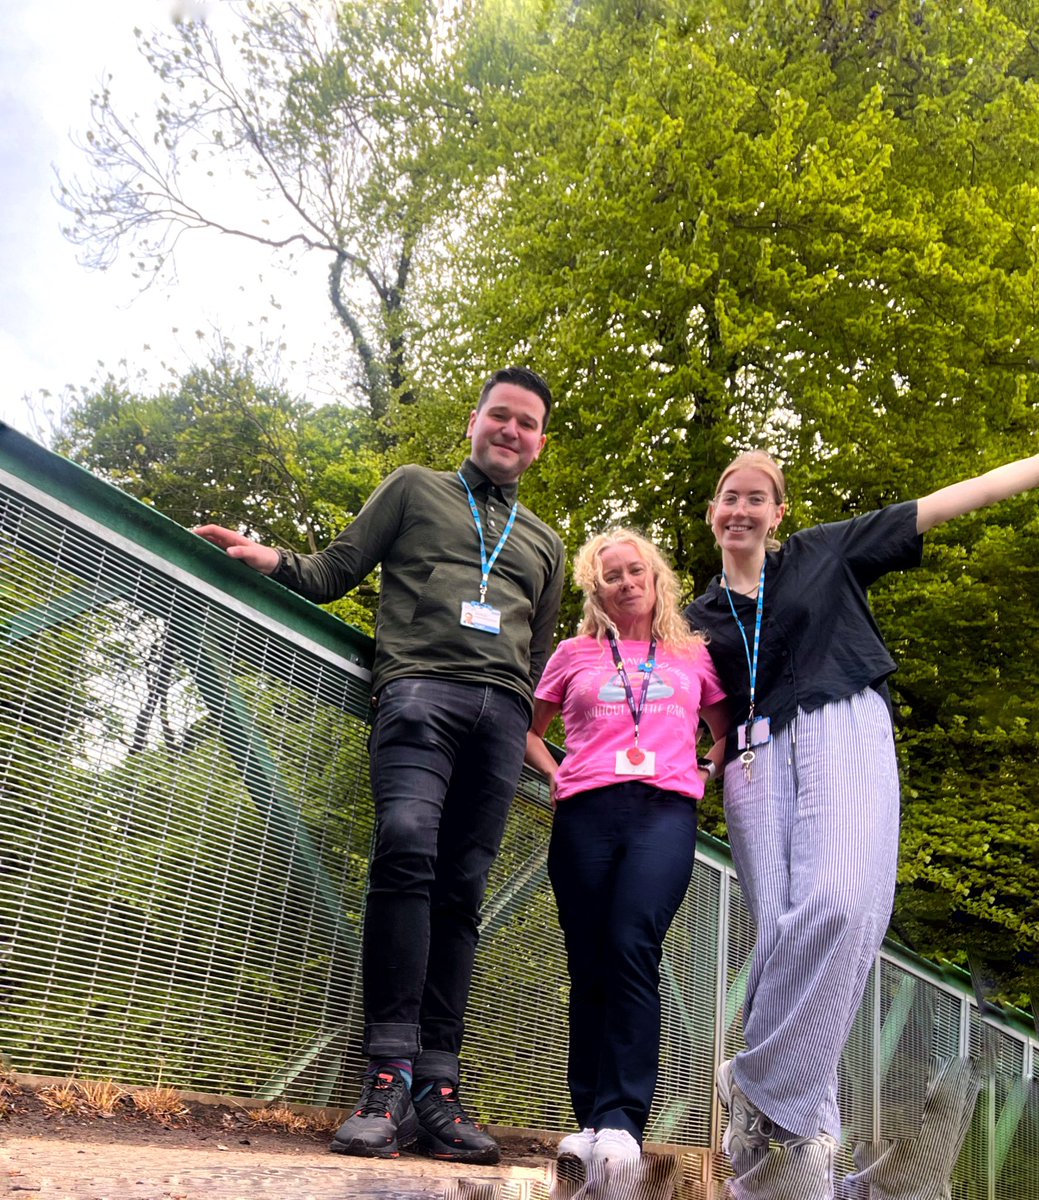 Fab adventure on our lunch walk with some of the Psychology team in Stockport. Even found a bridge we didn’t know existed! #movingformentalhealth #MentalHealthAwarenessWeek2024 @PennineCareNHS